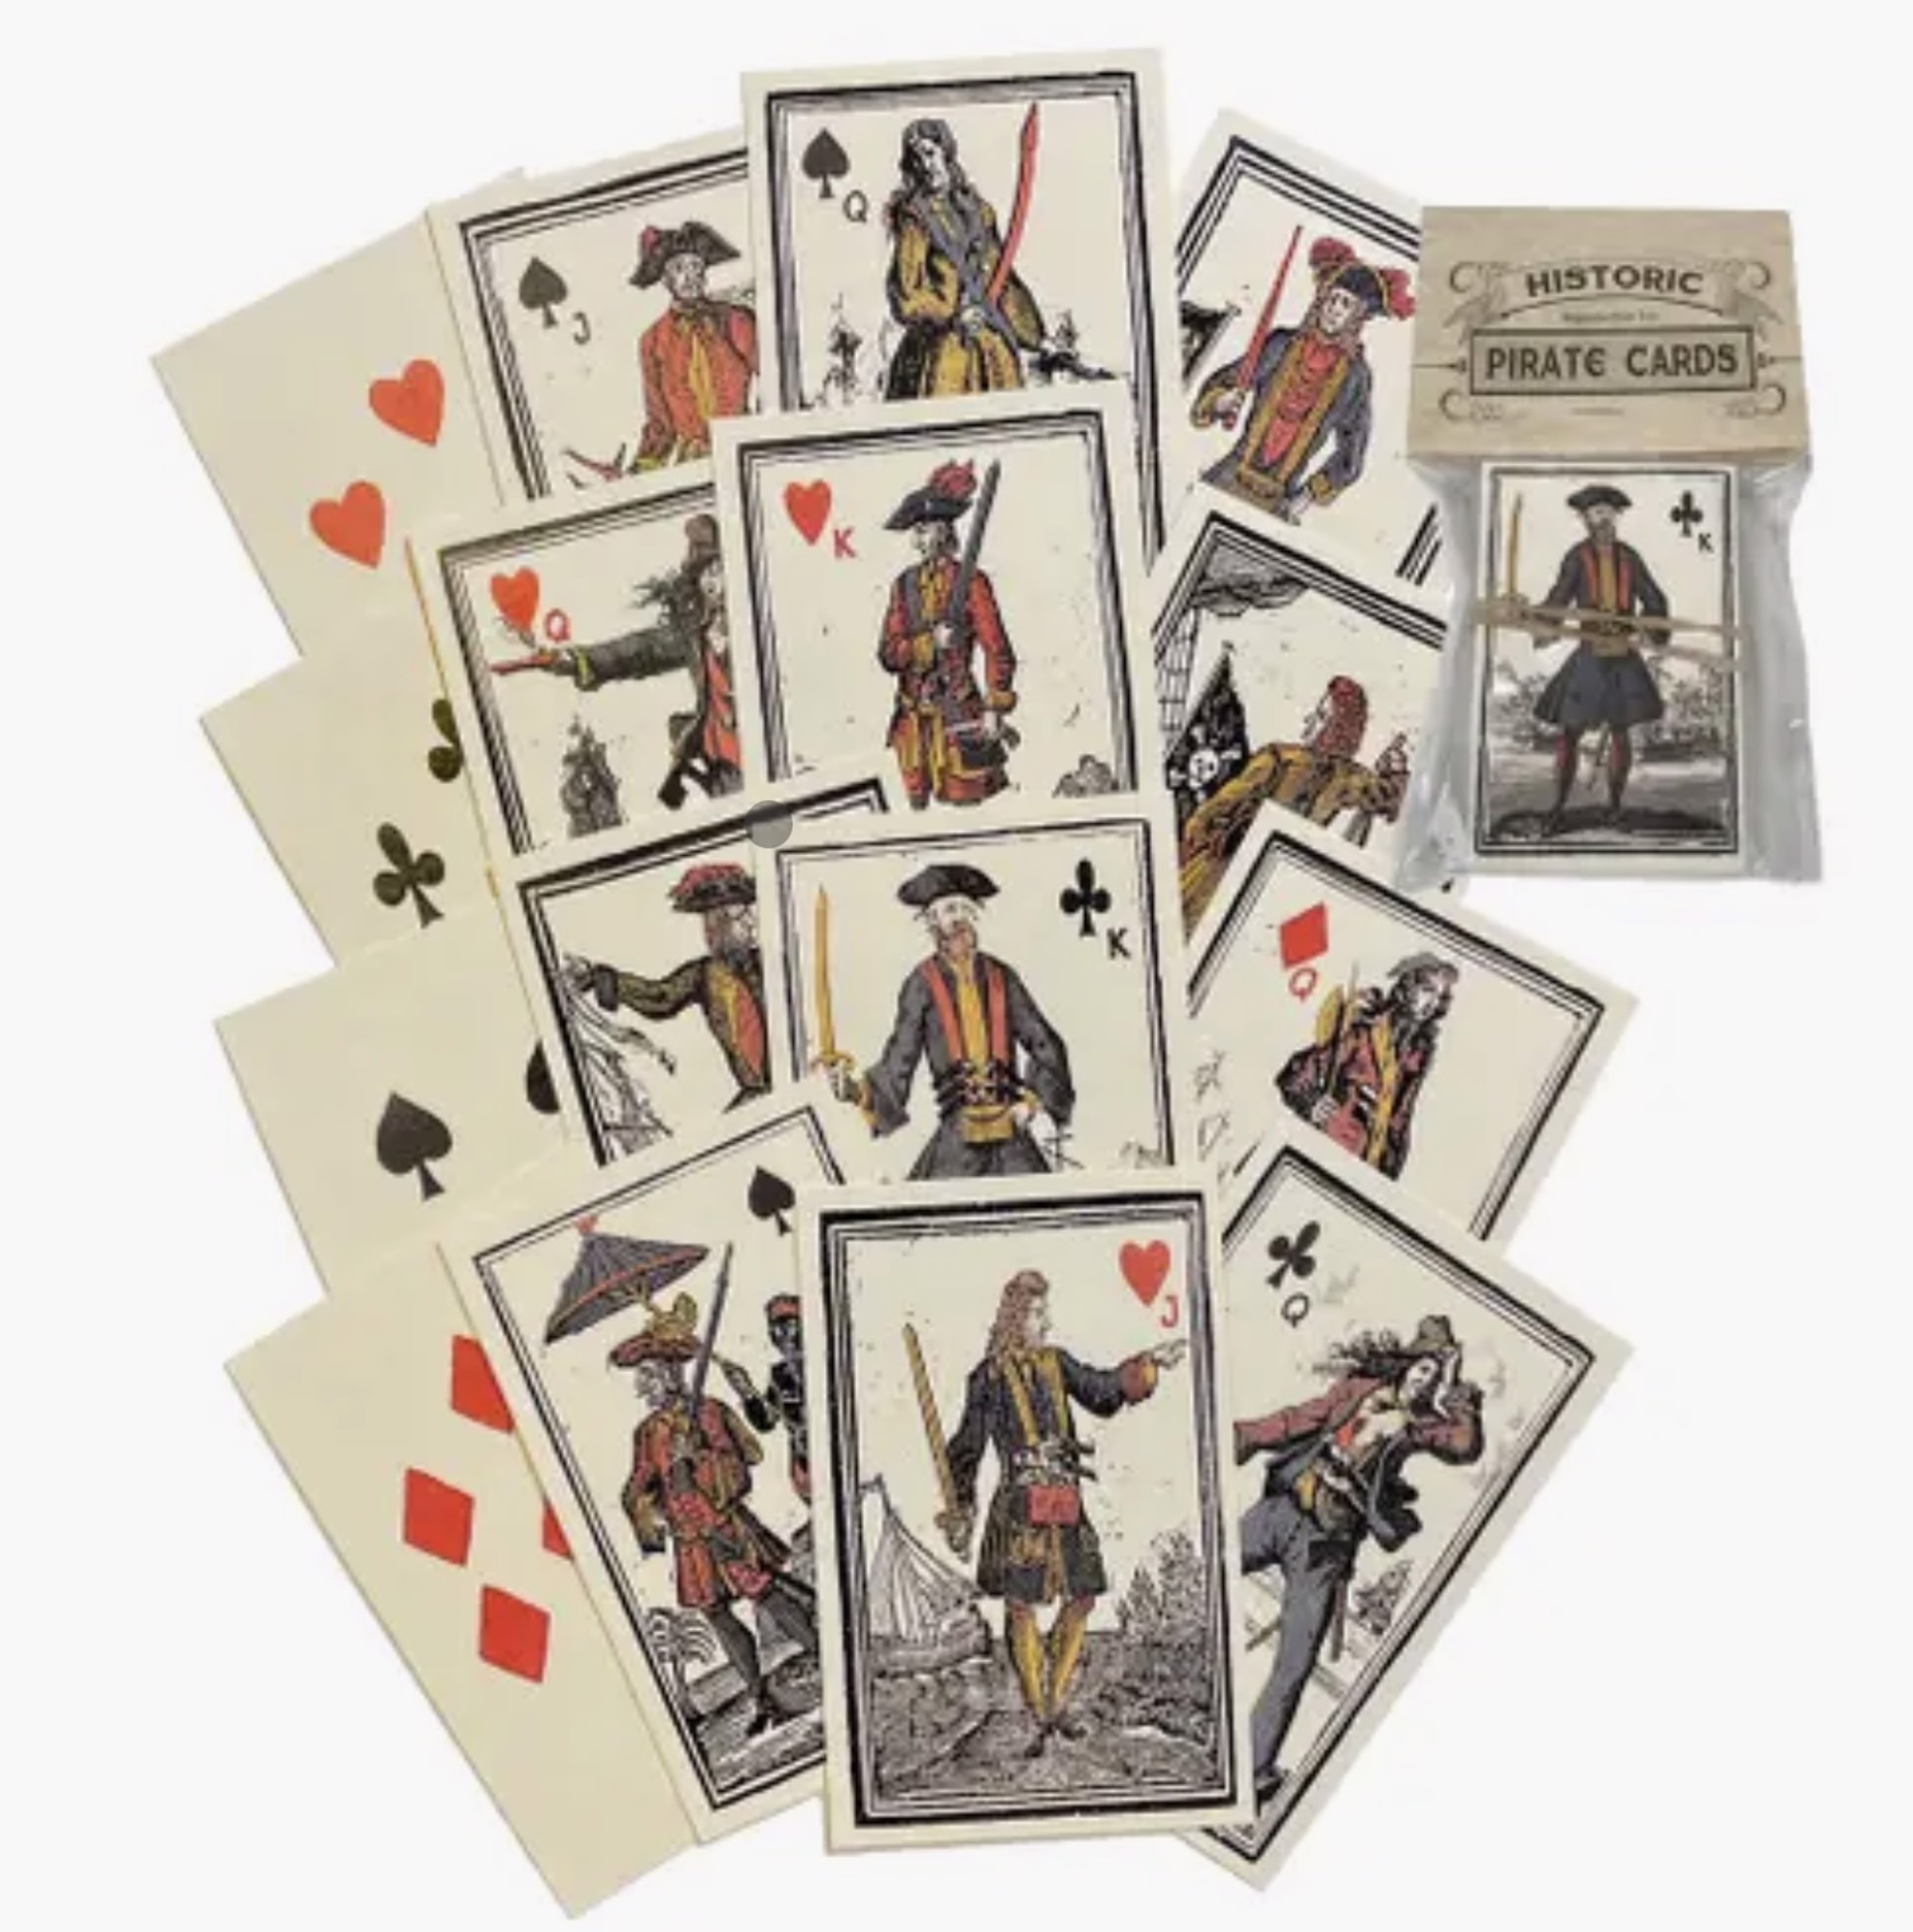 Pirate Themed Playing Cards - Antique Reproduction by Anticus Design Team